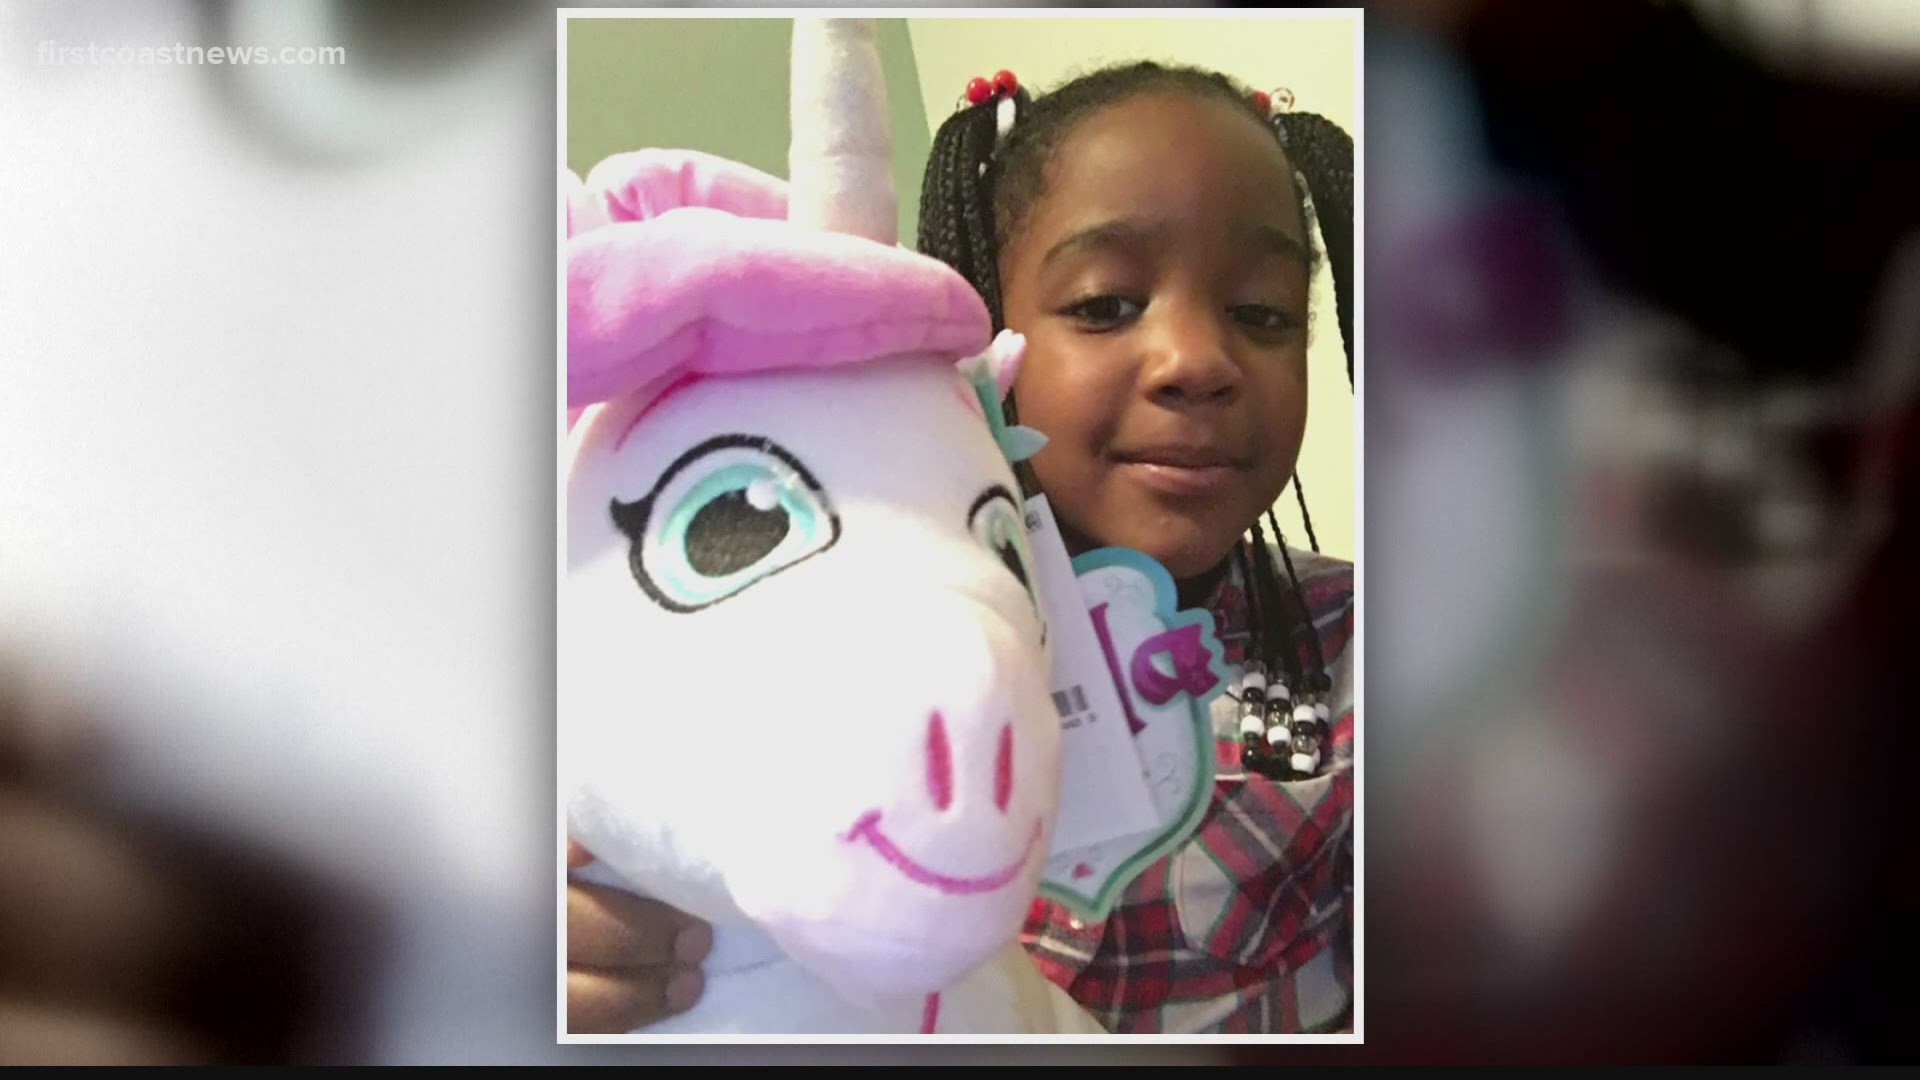 The 5-year-old girl was reported missing by her mom, Brianna Williams, who is now in jail facing charge of aggravated child abuse.